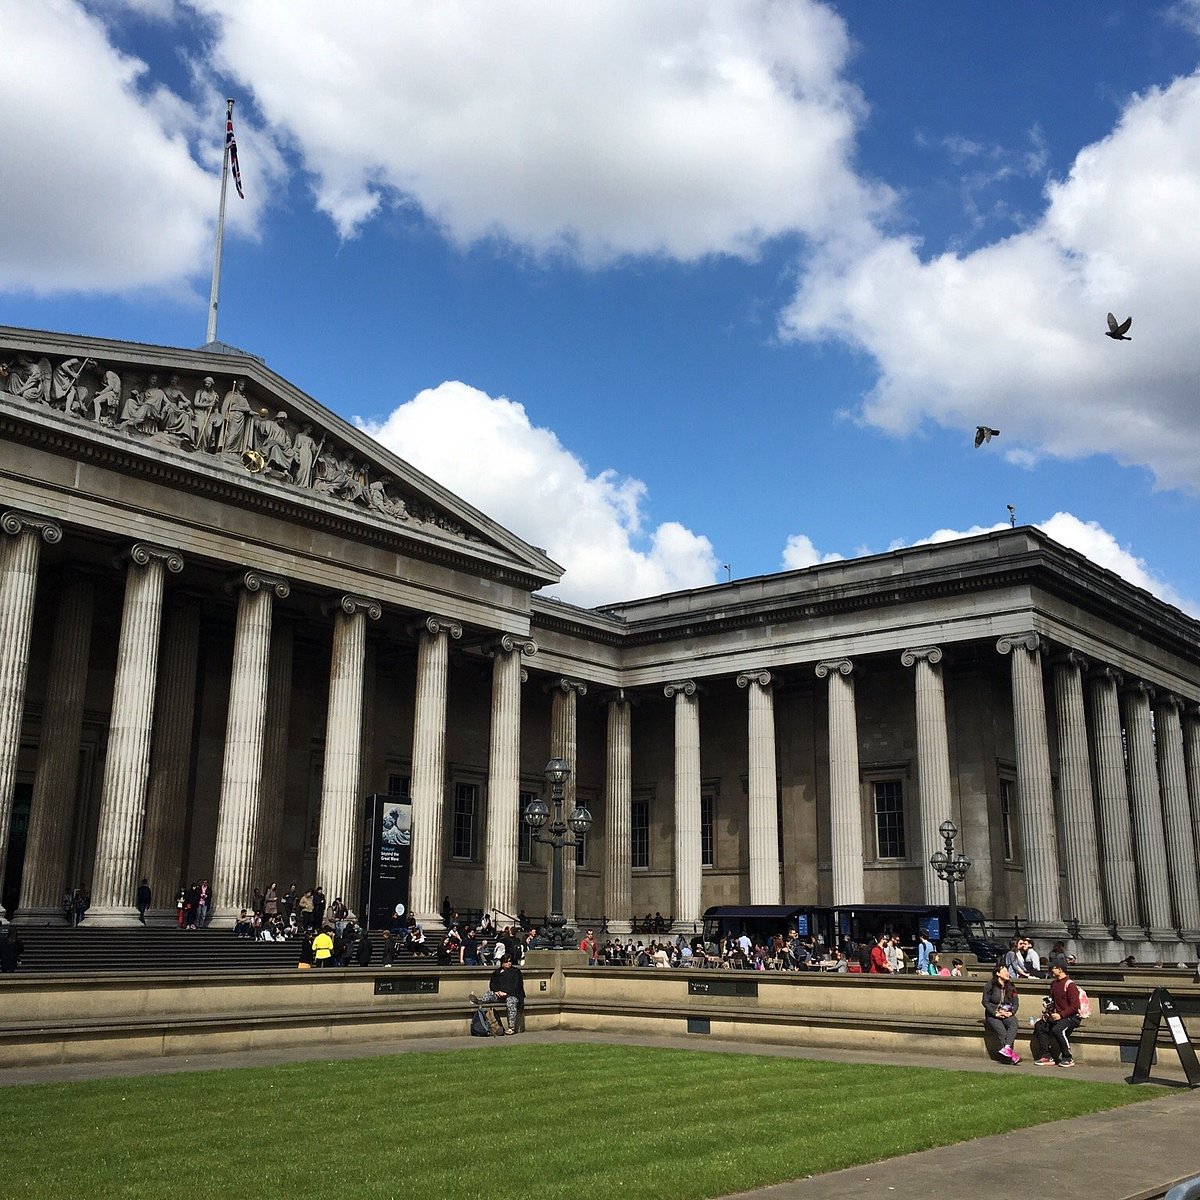 Exploring the Extensive and Crowded British Museum in London